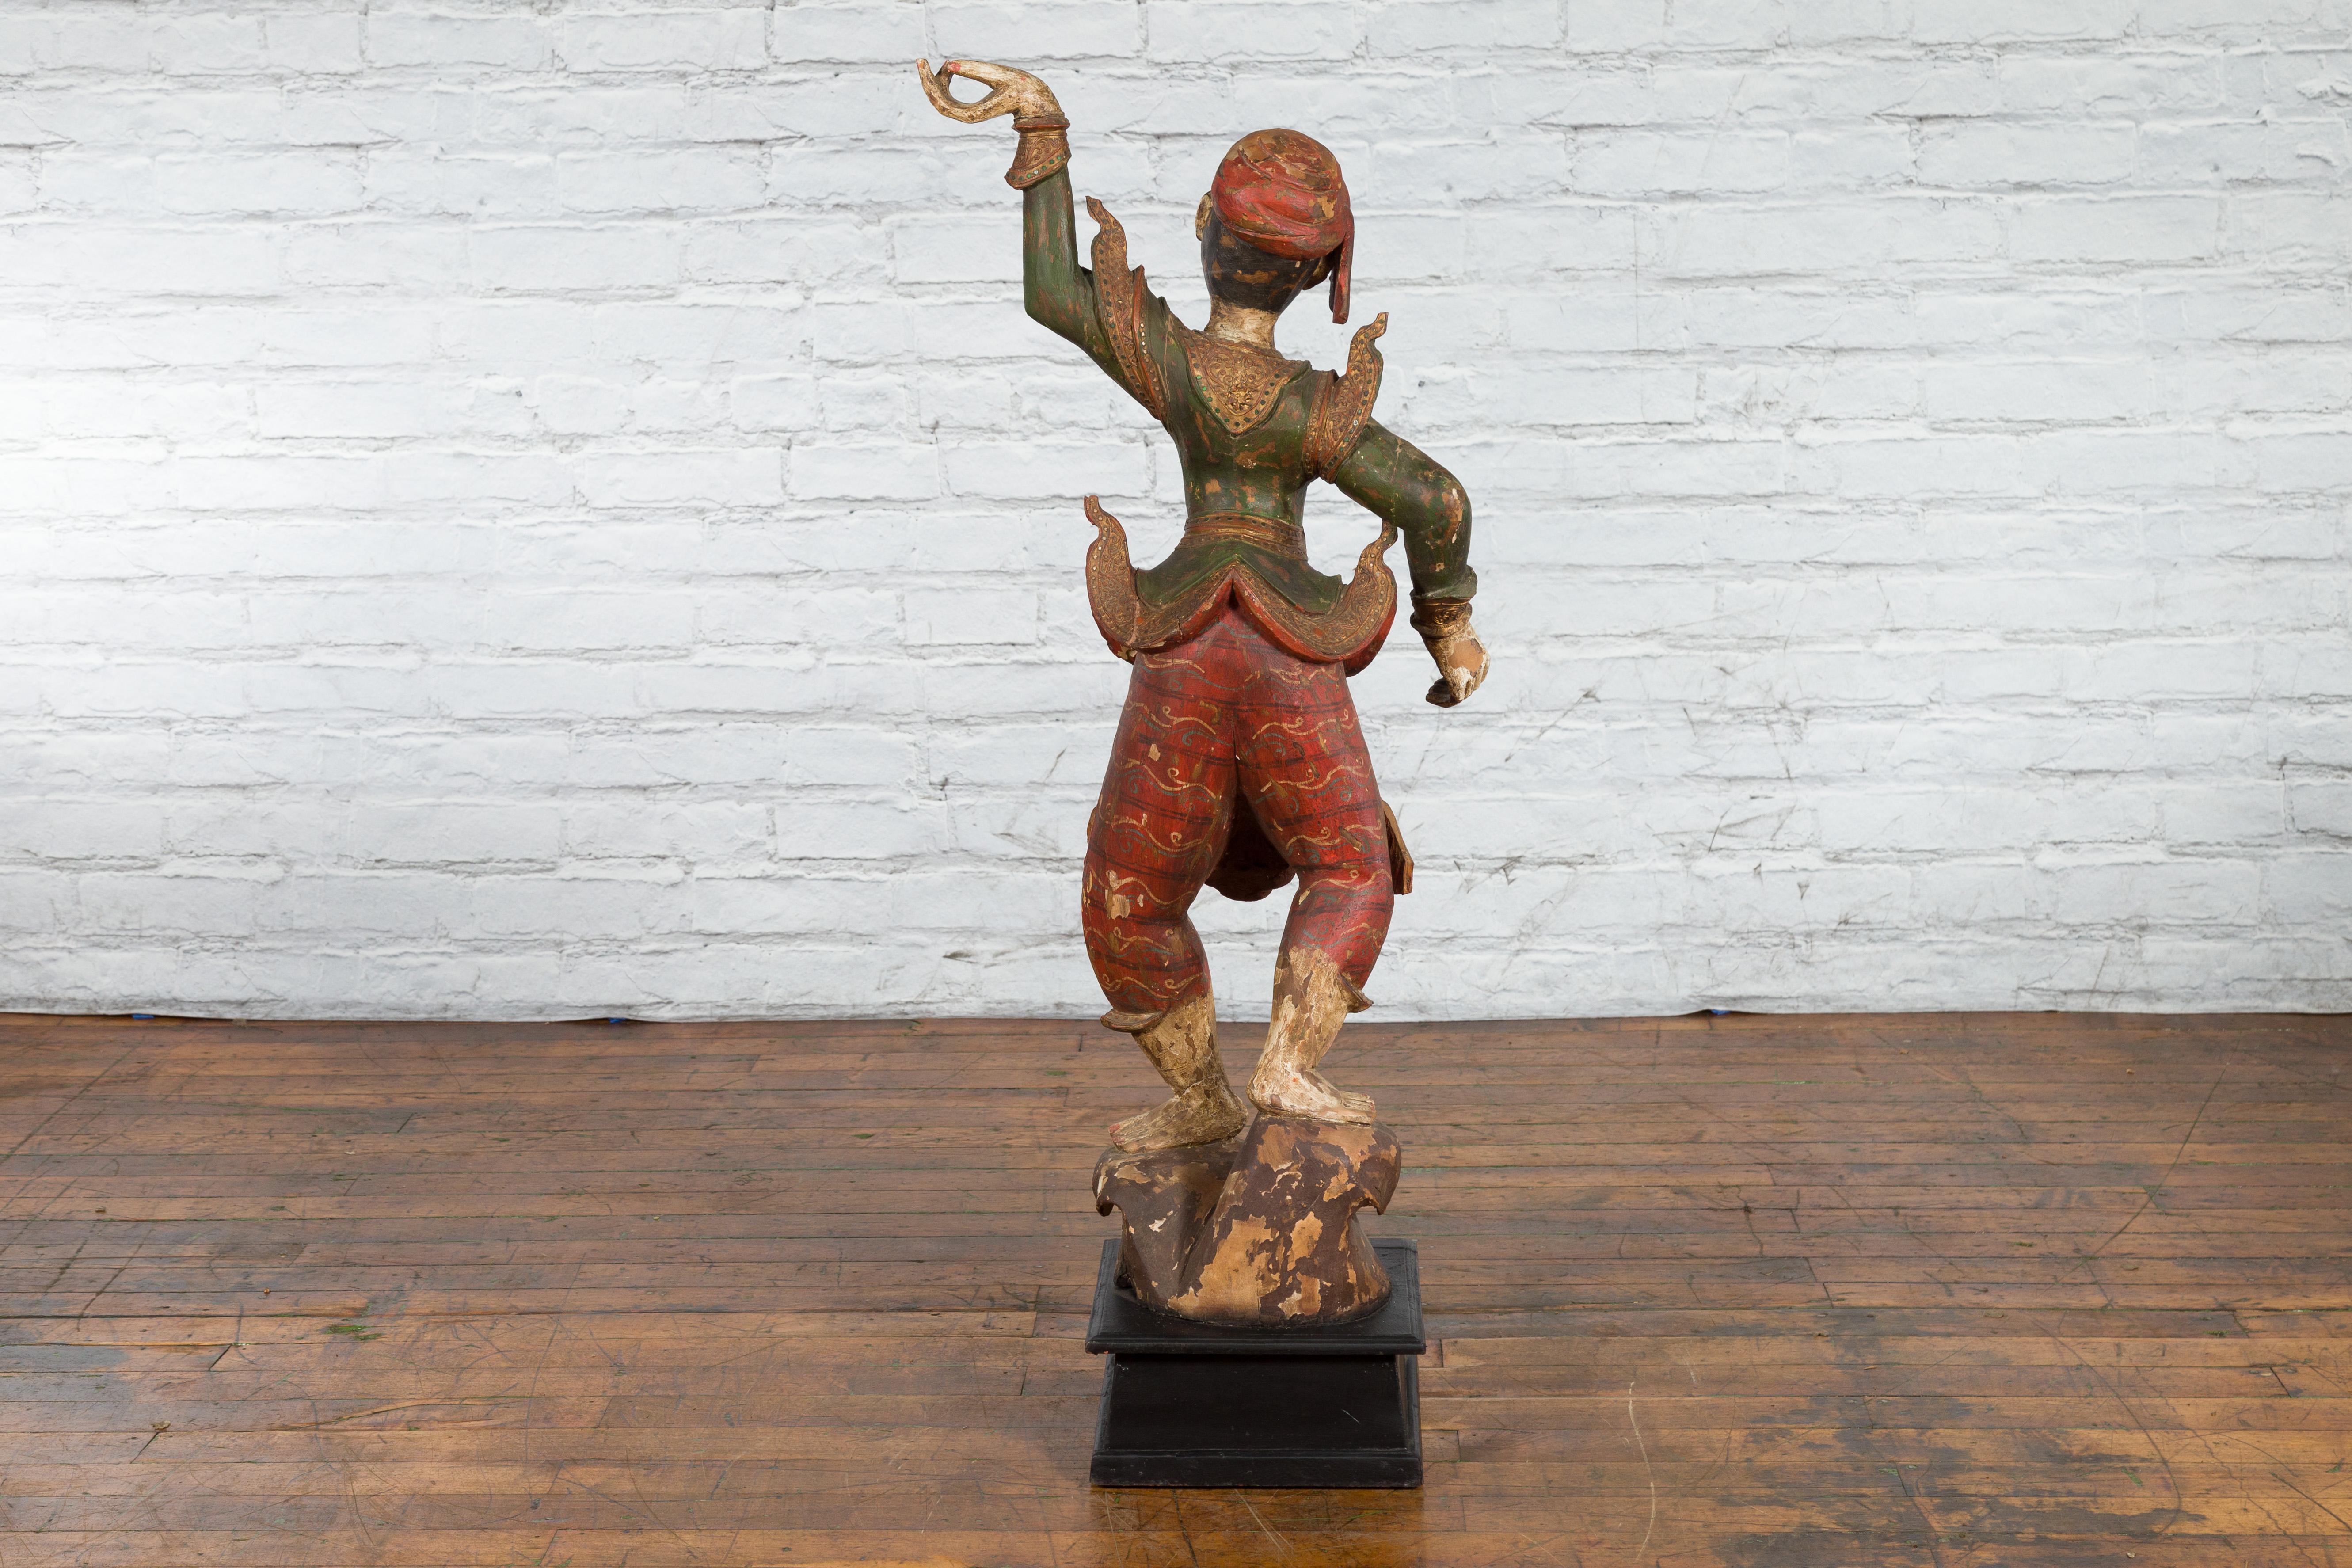 19th Century Balinese Hand-Carved and Painted Wooden Sculpture of a Young Dancer For Sale 9